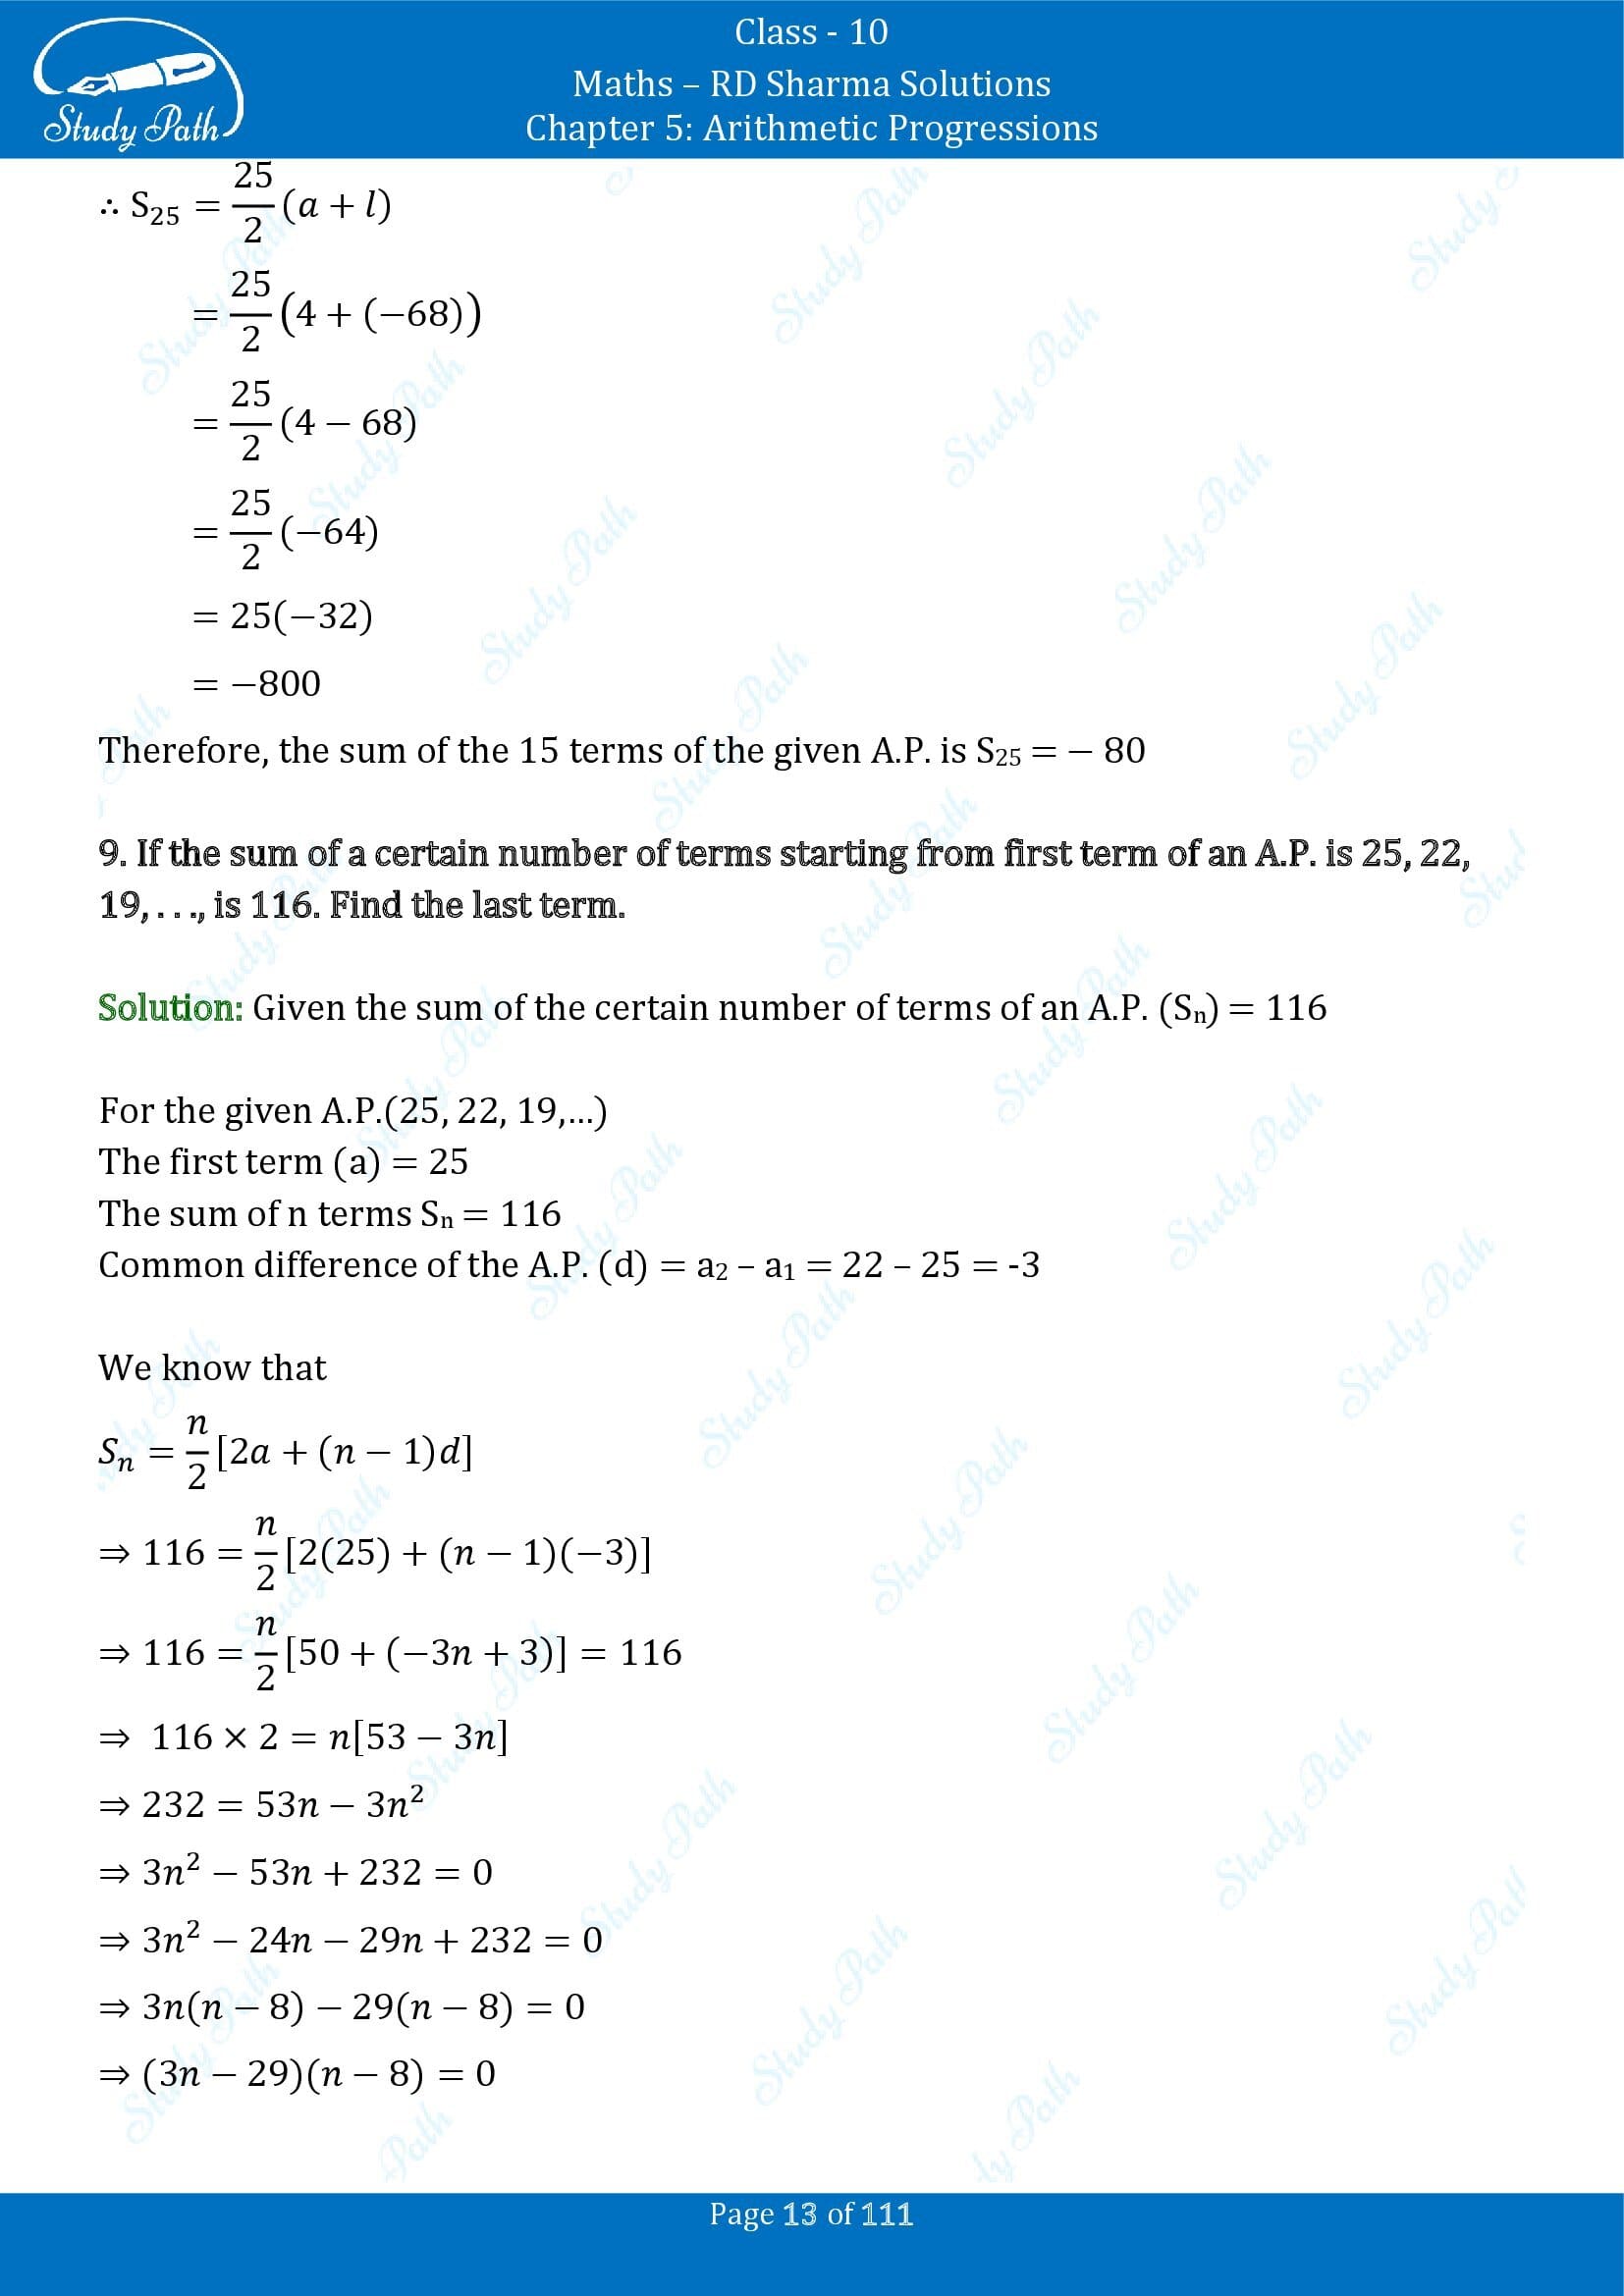 RD Sharma Solutions Class 10 Chapter 5 Arithmetic Progressions Exercise 5.6 00013